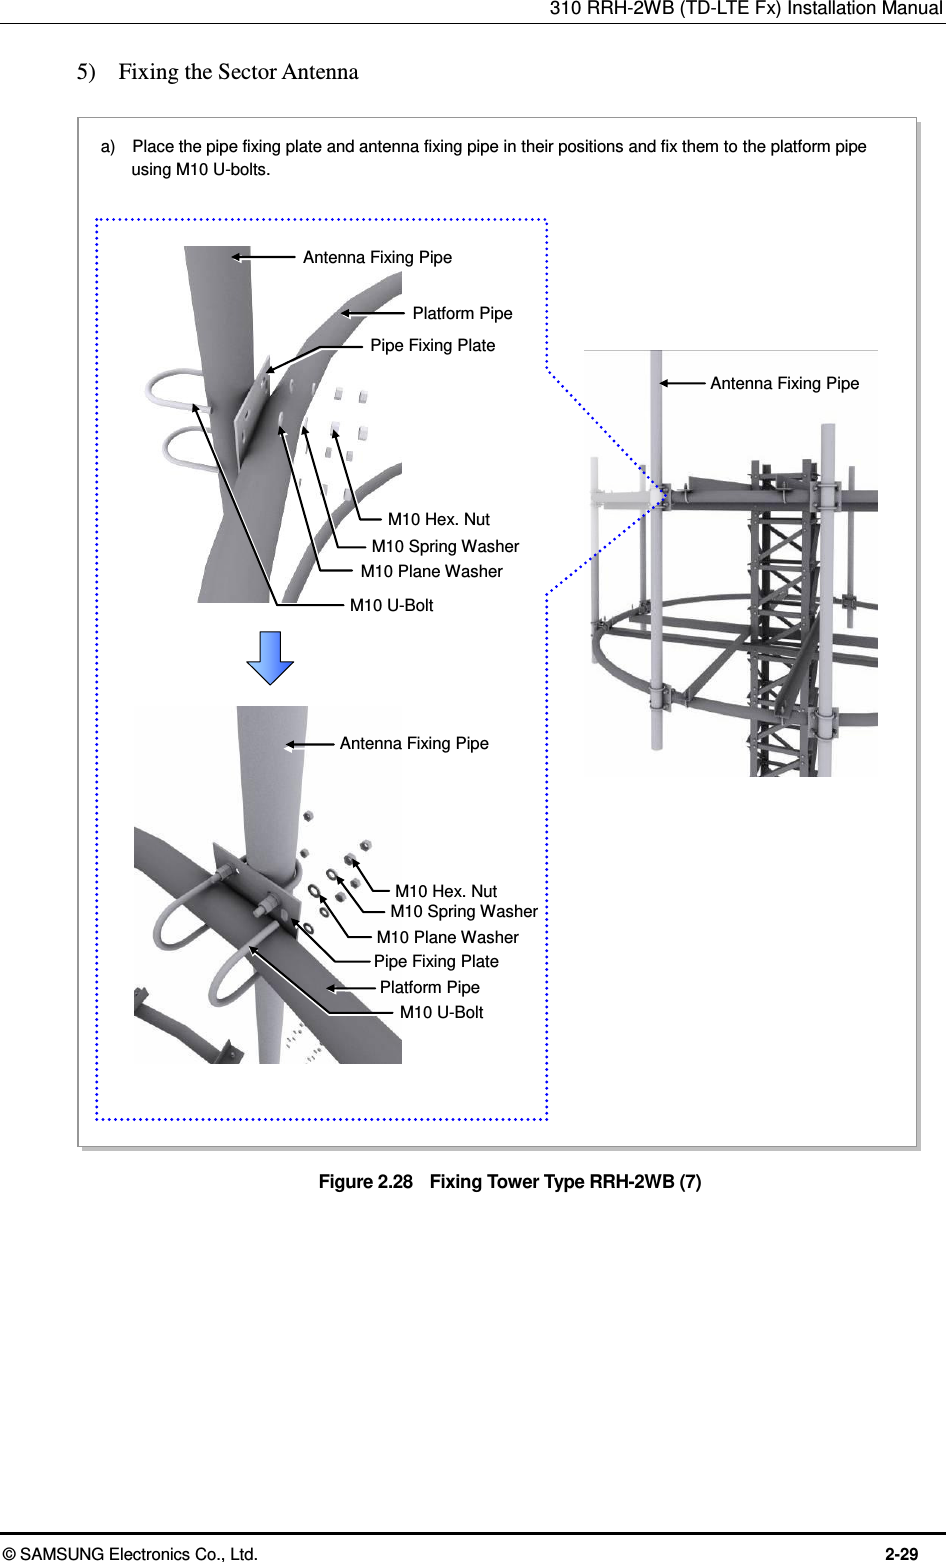 310 RRH-2WB (TD-LTE Fx) Installation Manual  © SAMSUNG Electronics Co., Ltd.  2-29 5)    Fixing the Sector Antenna  Figure 2.28    Fixing Tower Type RRH-2WB (7) a)    Place the pipe fixing plate and antenna fixing pipe in their positions and fix them to the platform pipe using M10 U-bolts.   Antenna Fixing Pipe Pipe Fixing Plate Platform Pipe Antenna Fixing Pipe Platform Pipe Pipe Fixing Plate M10 Hex. Nut M10 Spring Washer M10 Plane Washer M10 U-Bolt Antenna Fixing Pipe M10 Hex. Nut M10 Spring Washer M10 Plane Washer M10 U-Bolt 